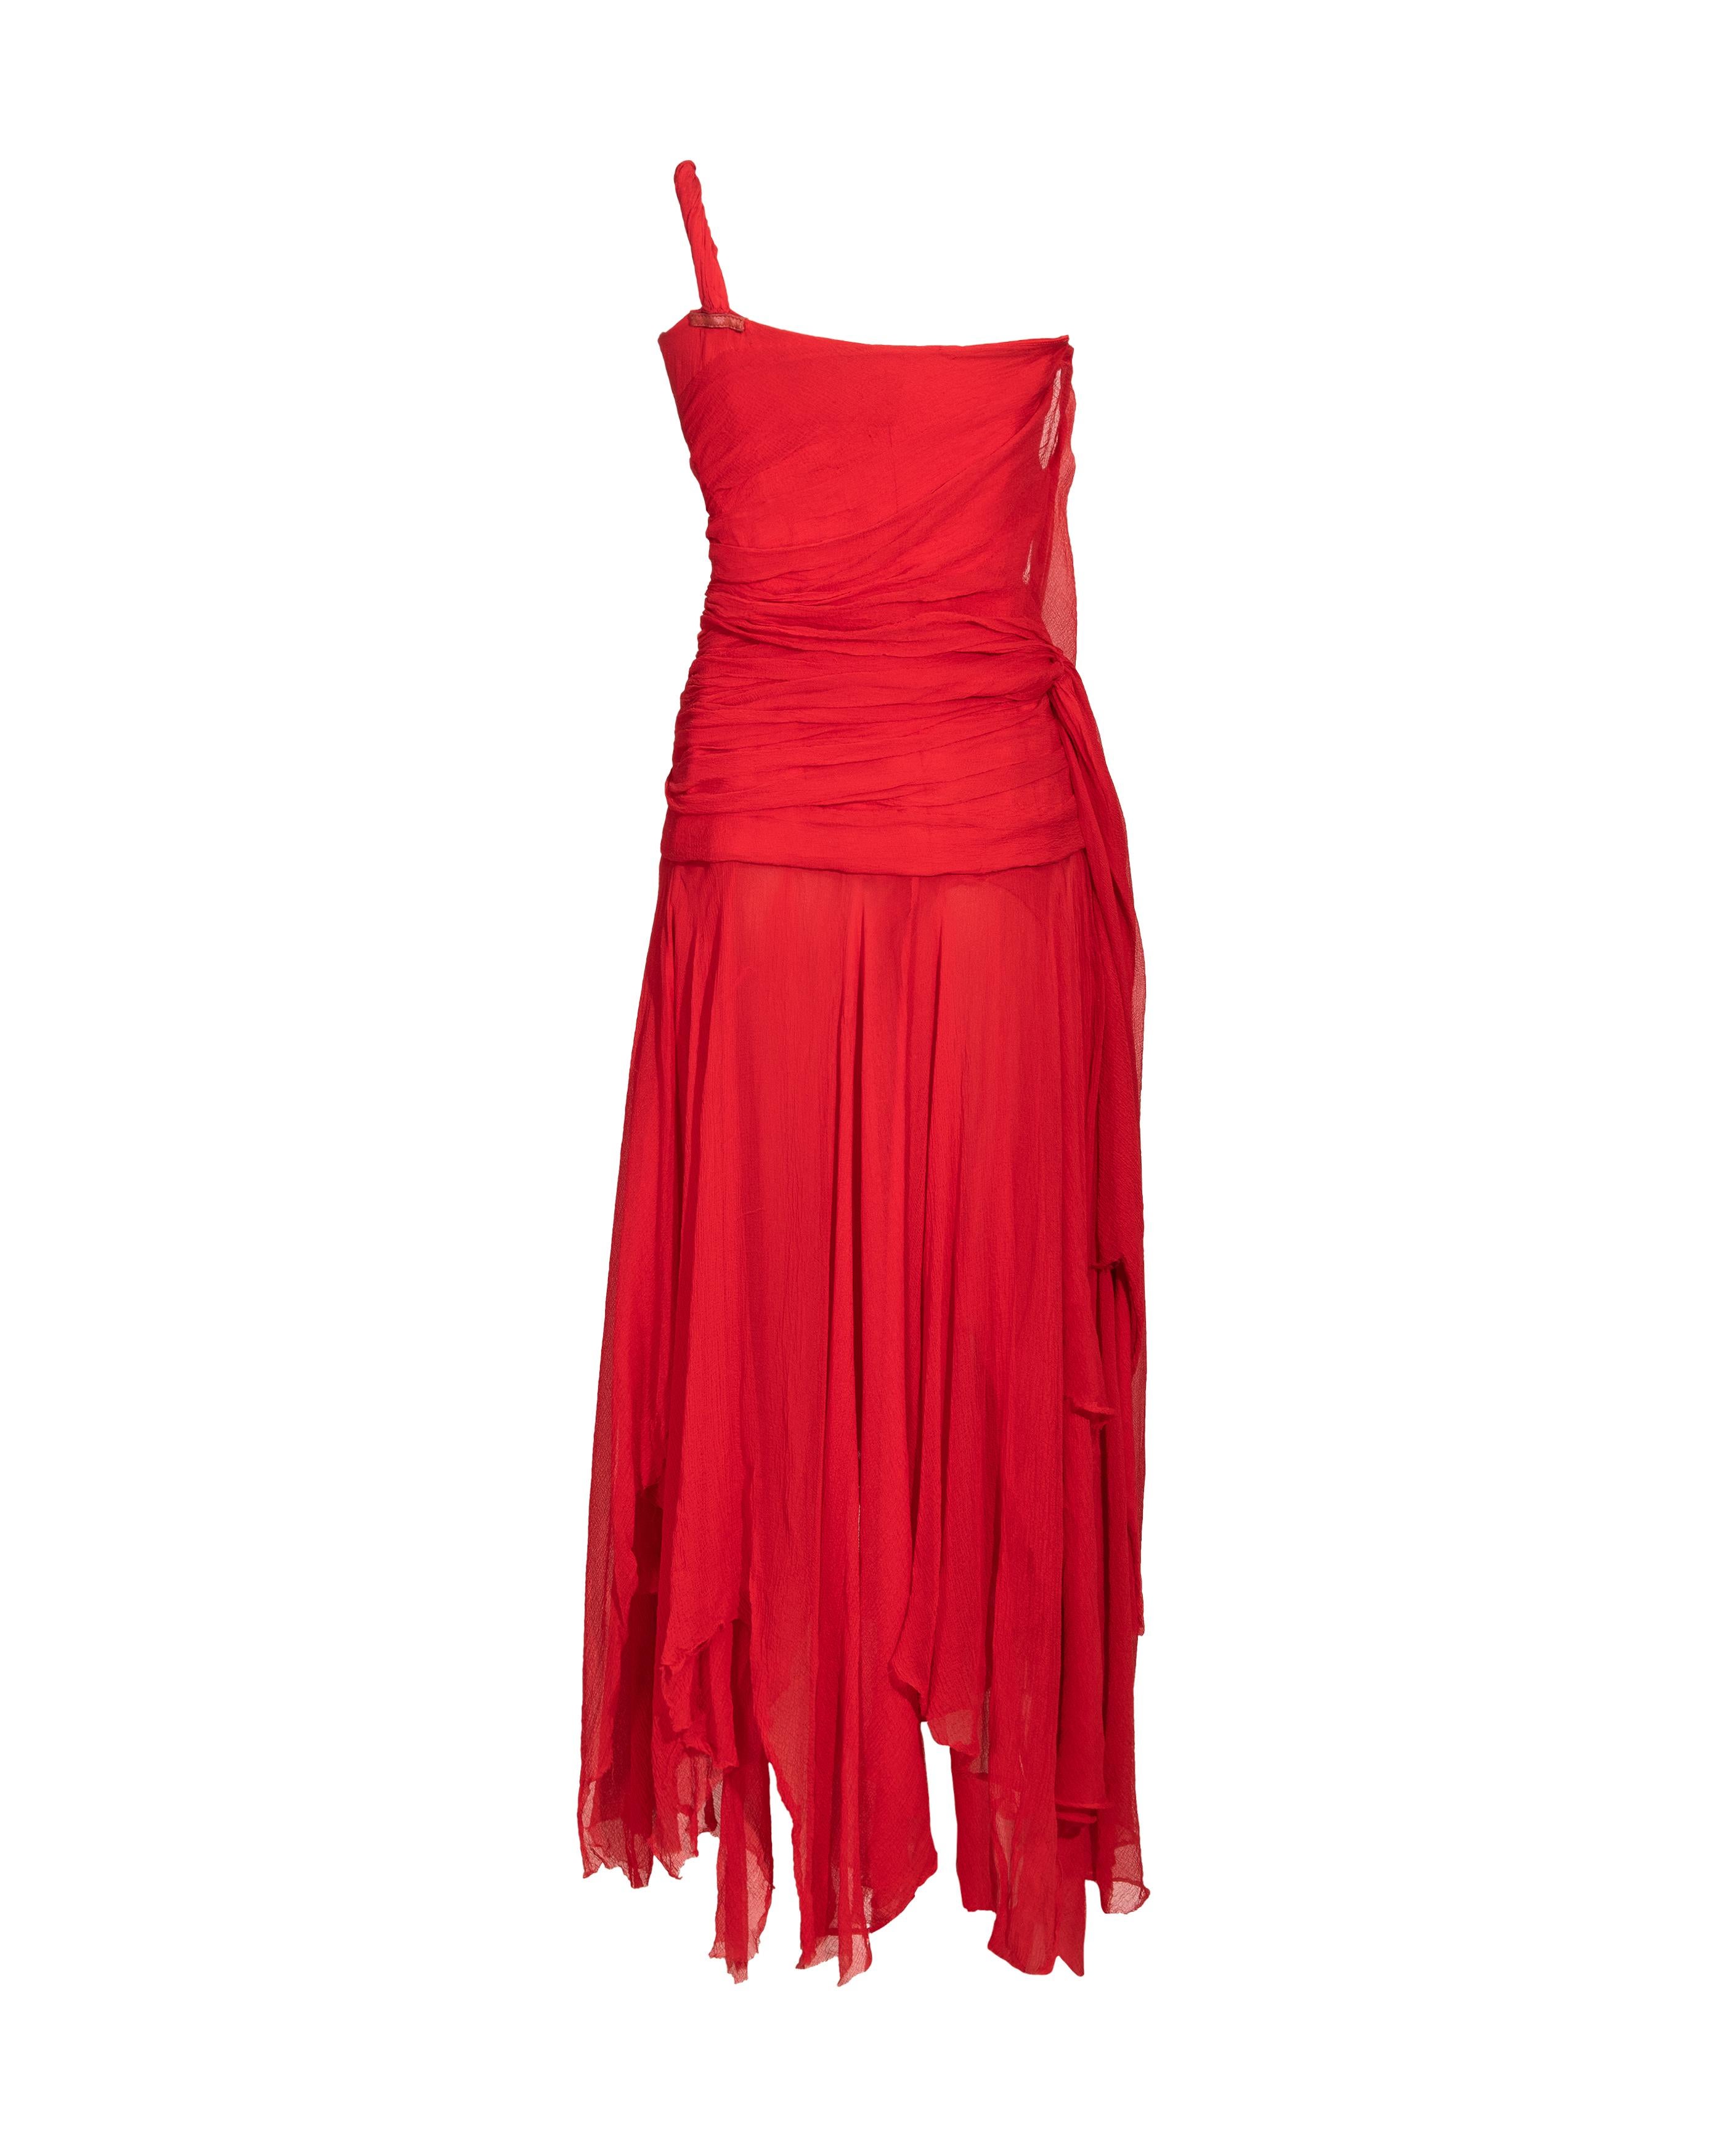 S/S 2003 Alexander McQueen  'Irere' Collection Red Silk Chiffon Gown with Sash For Sale 6